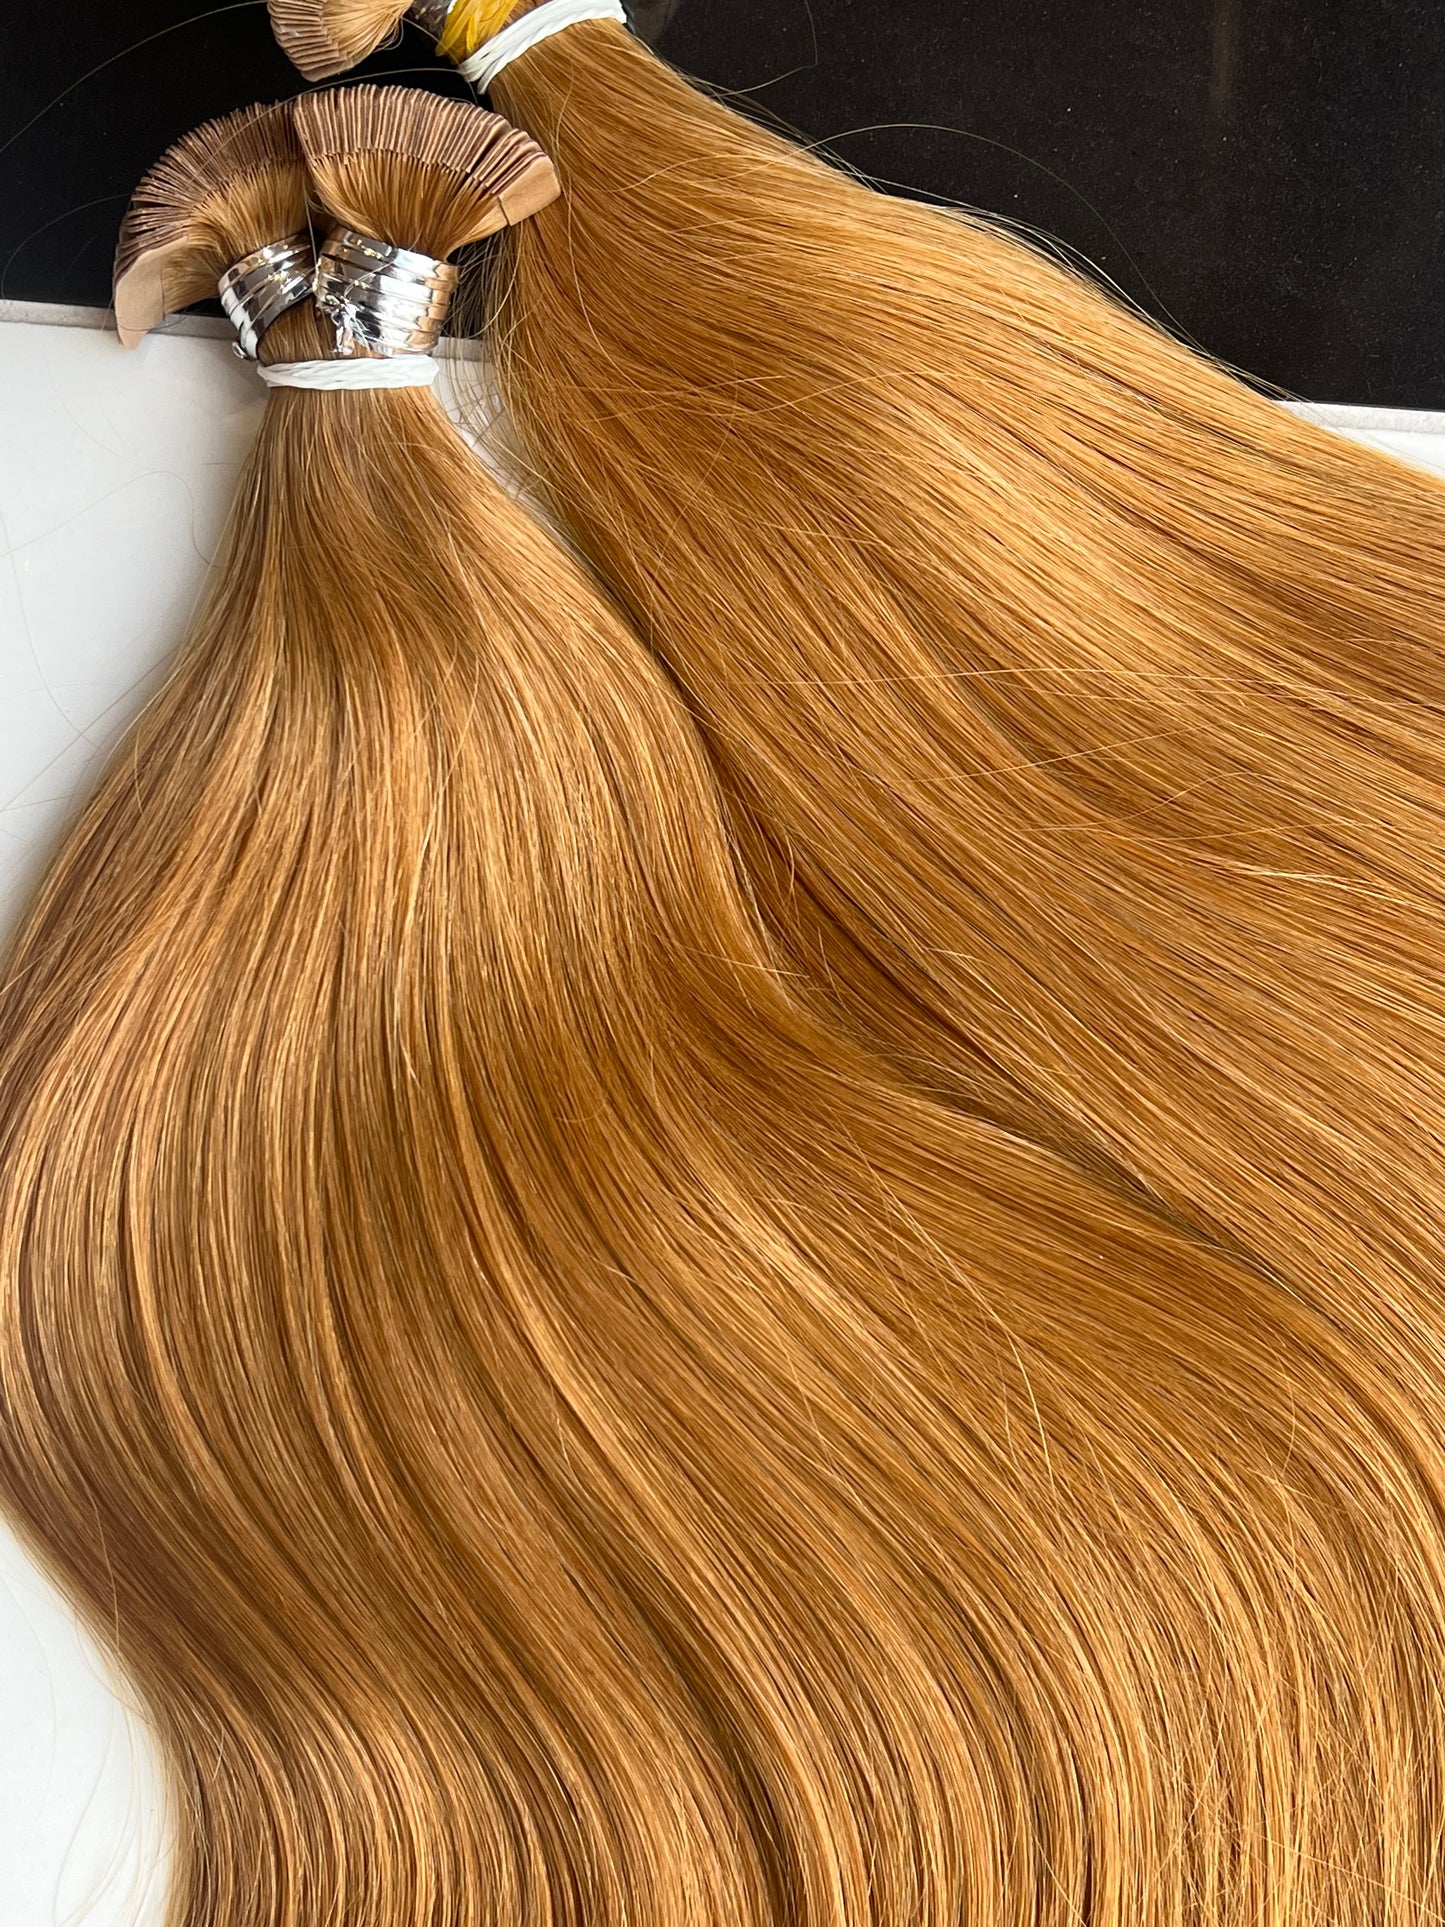 20” Tape in Hair Extensions - Shade Auburn 30 - Ladylux